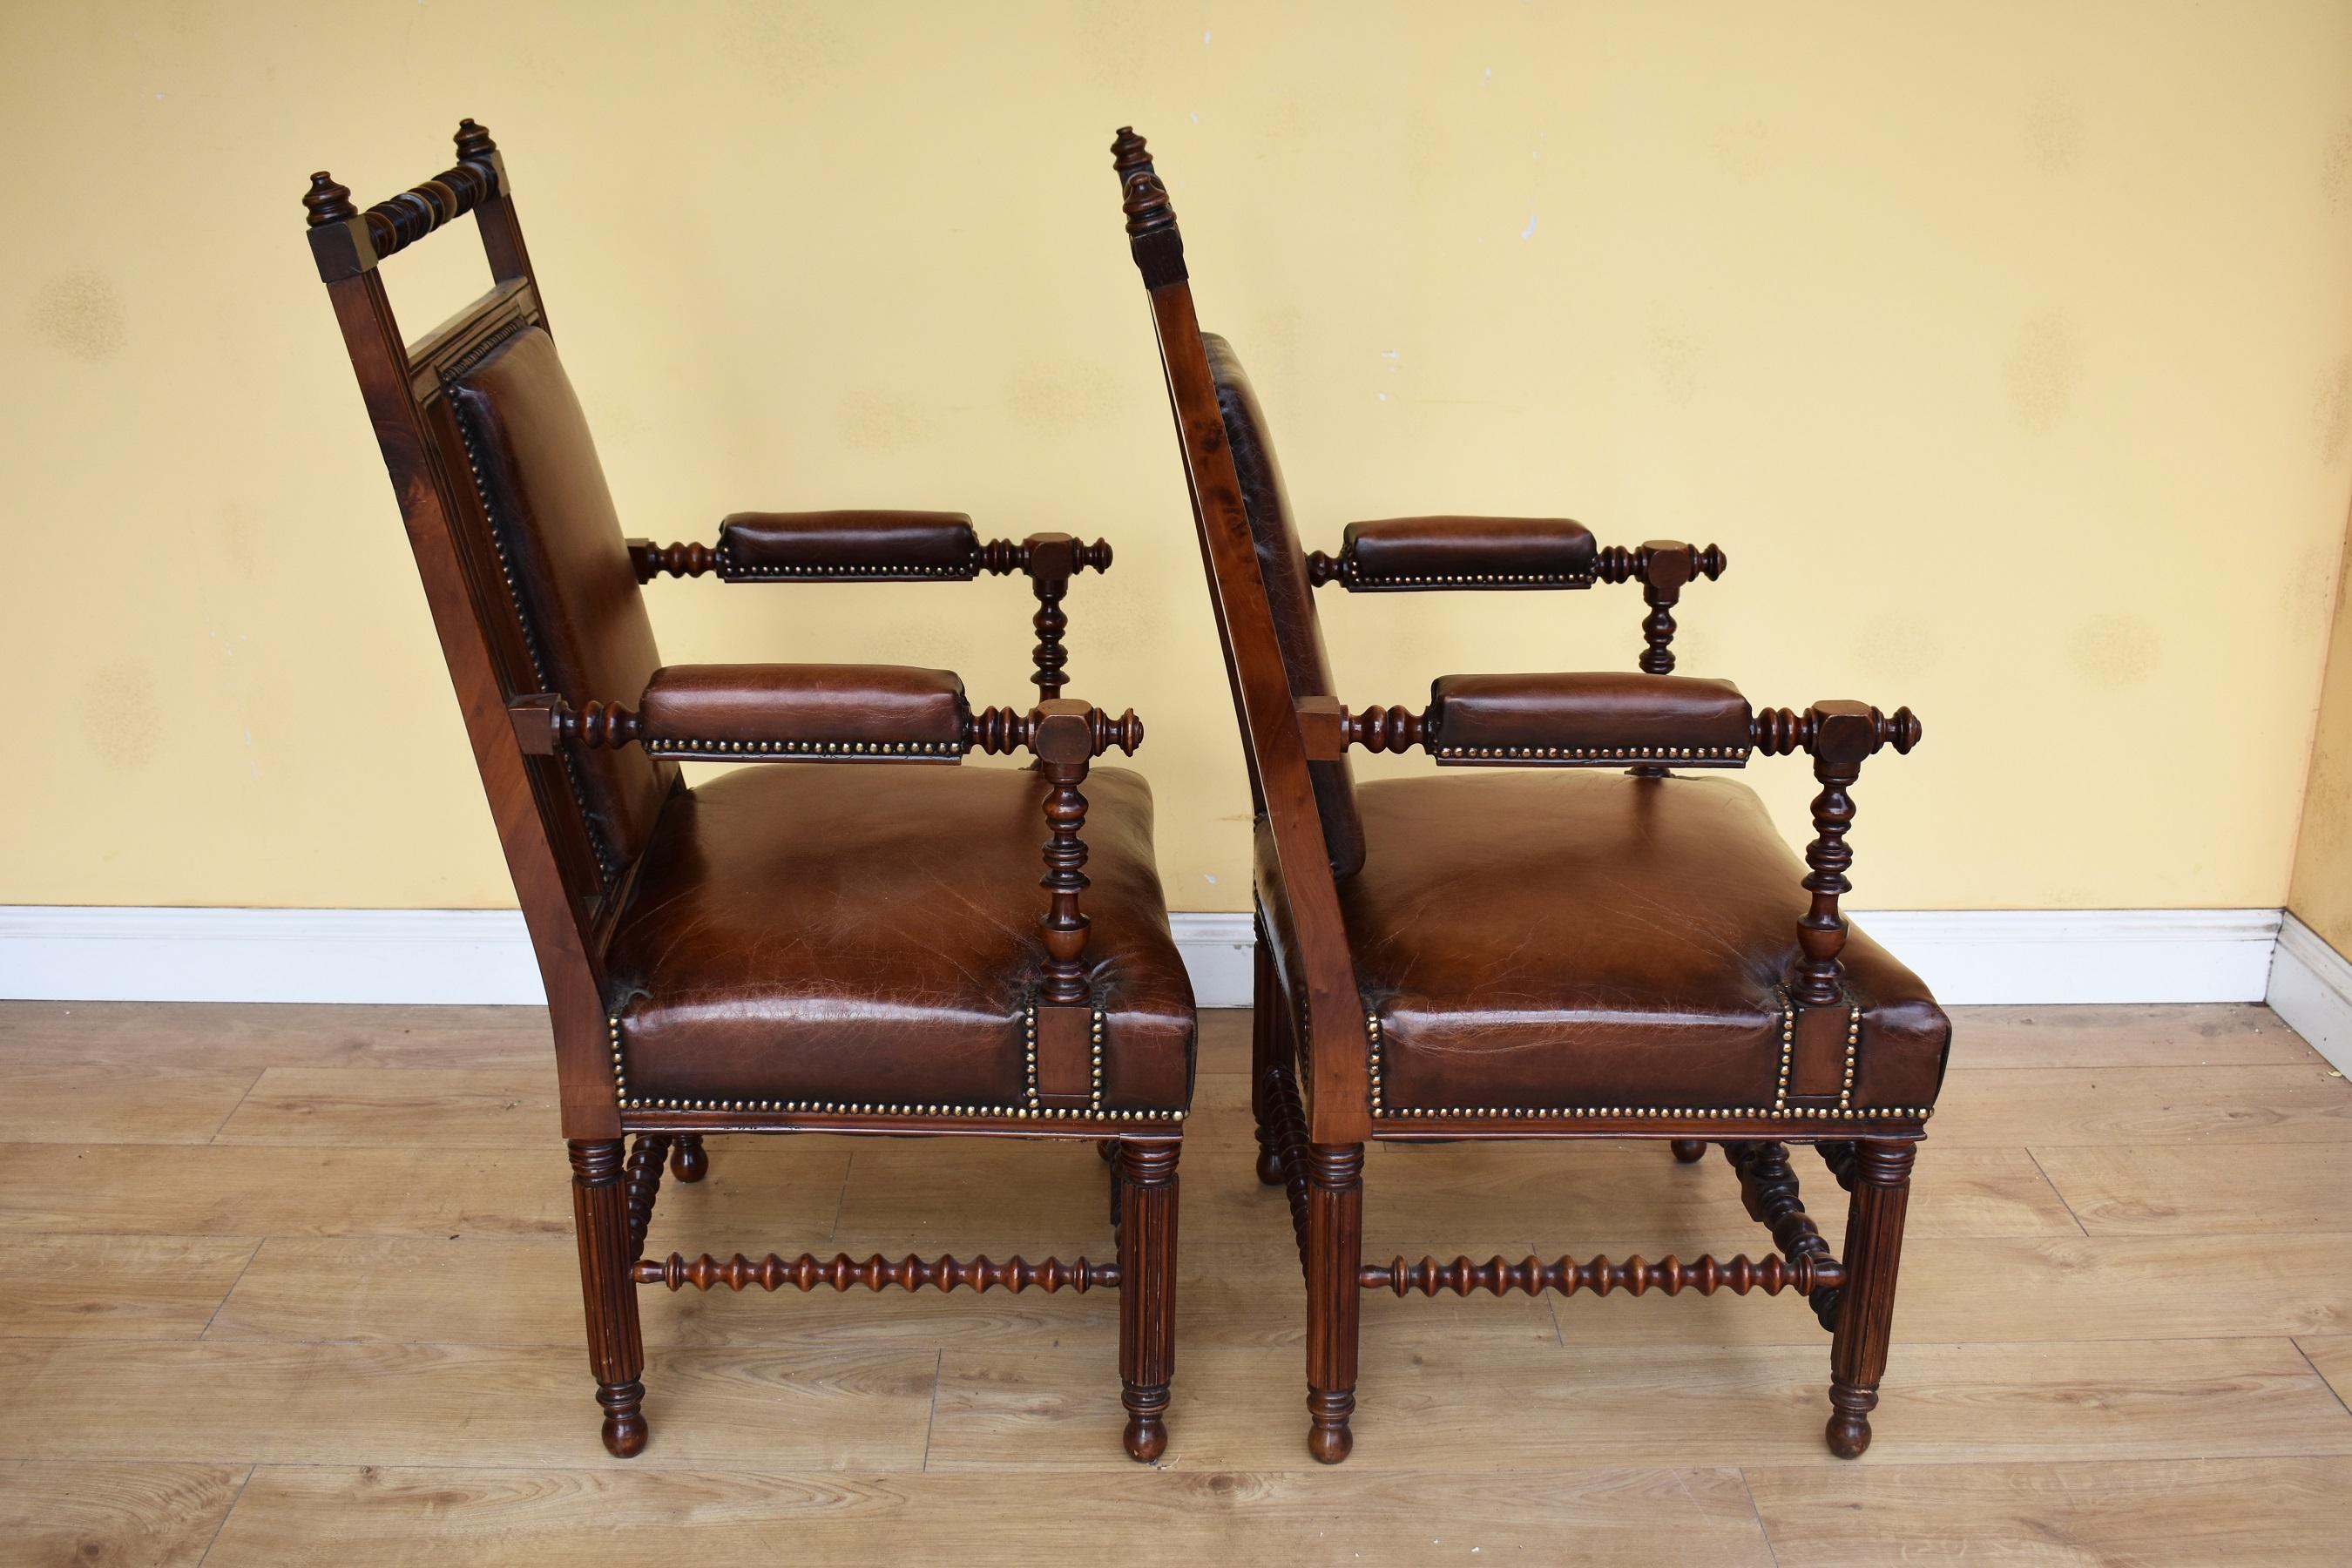 Pair of 19th Century English Victorian Gothic Revival Walnut Armchairs In Good Condition For Sale In Chelmsford, Essex